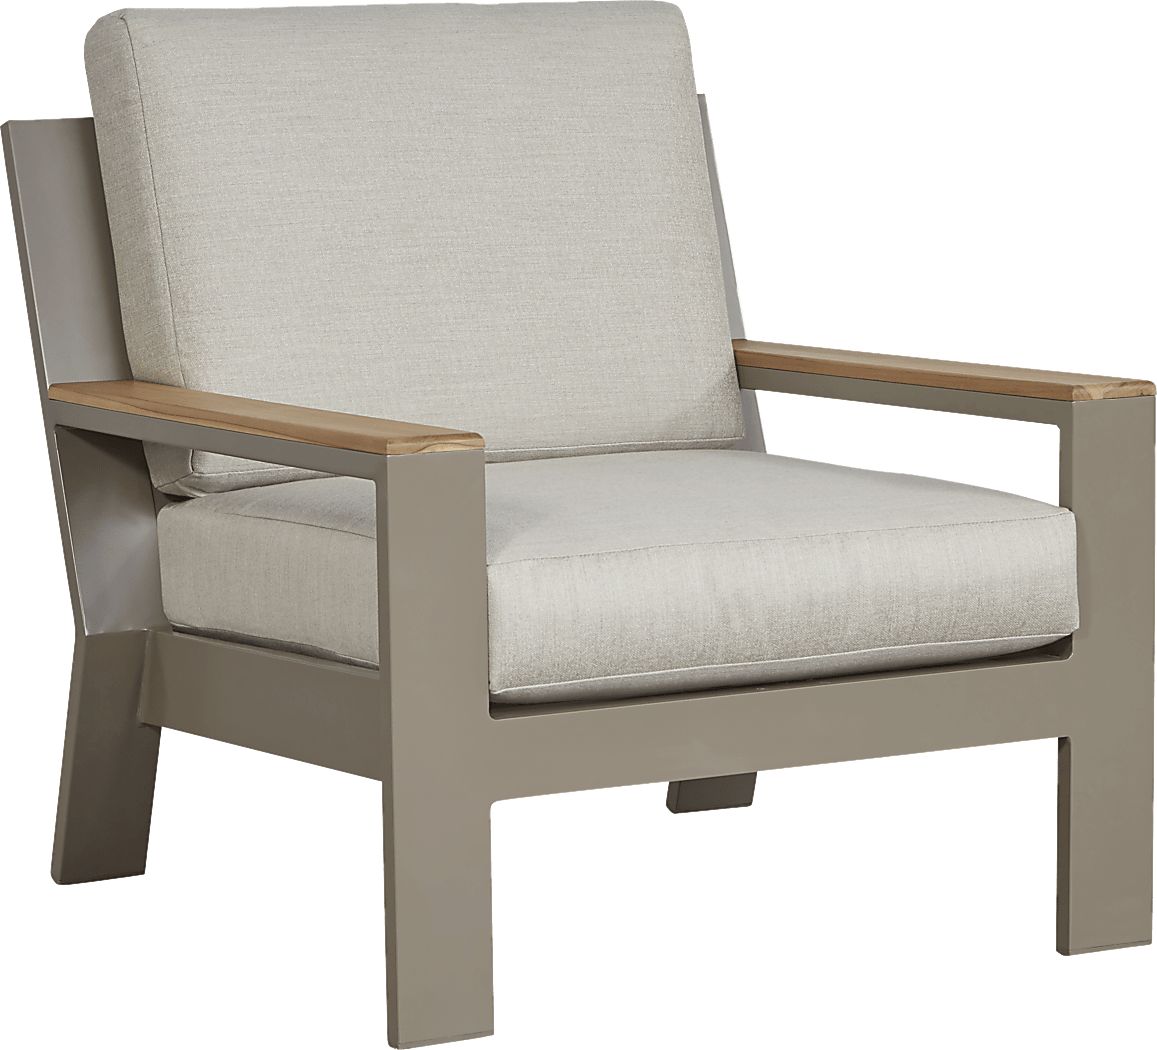 Solana Taupe 4 Pc Outdoor Seating Set with Beige Cushions